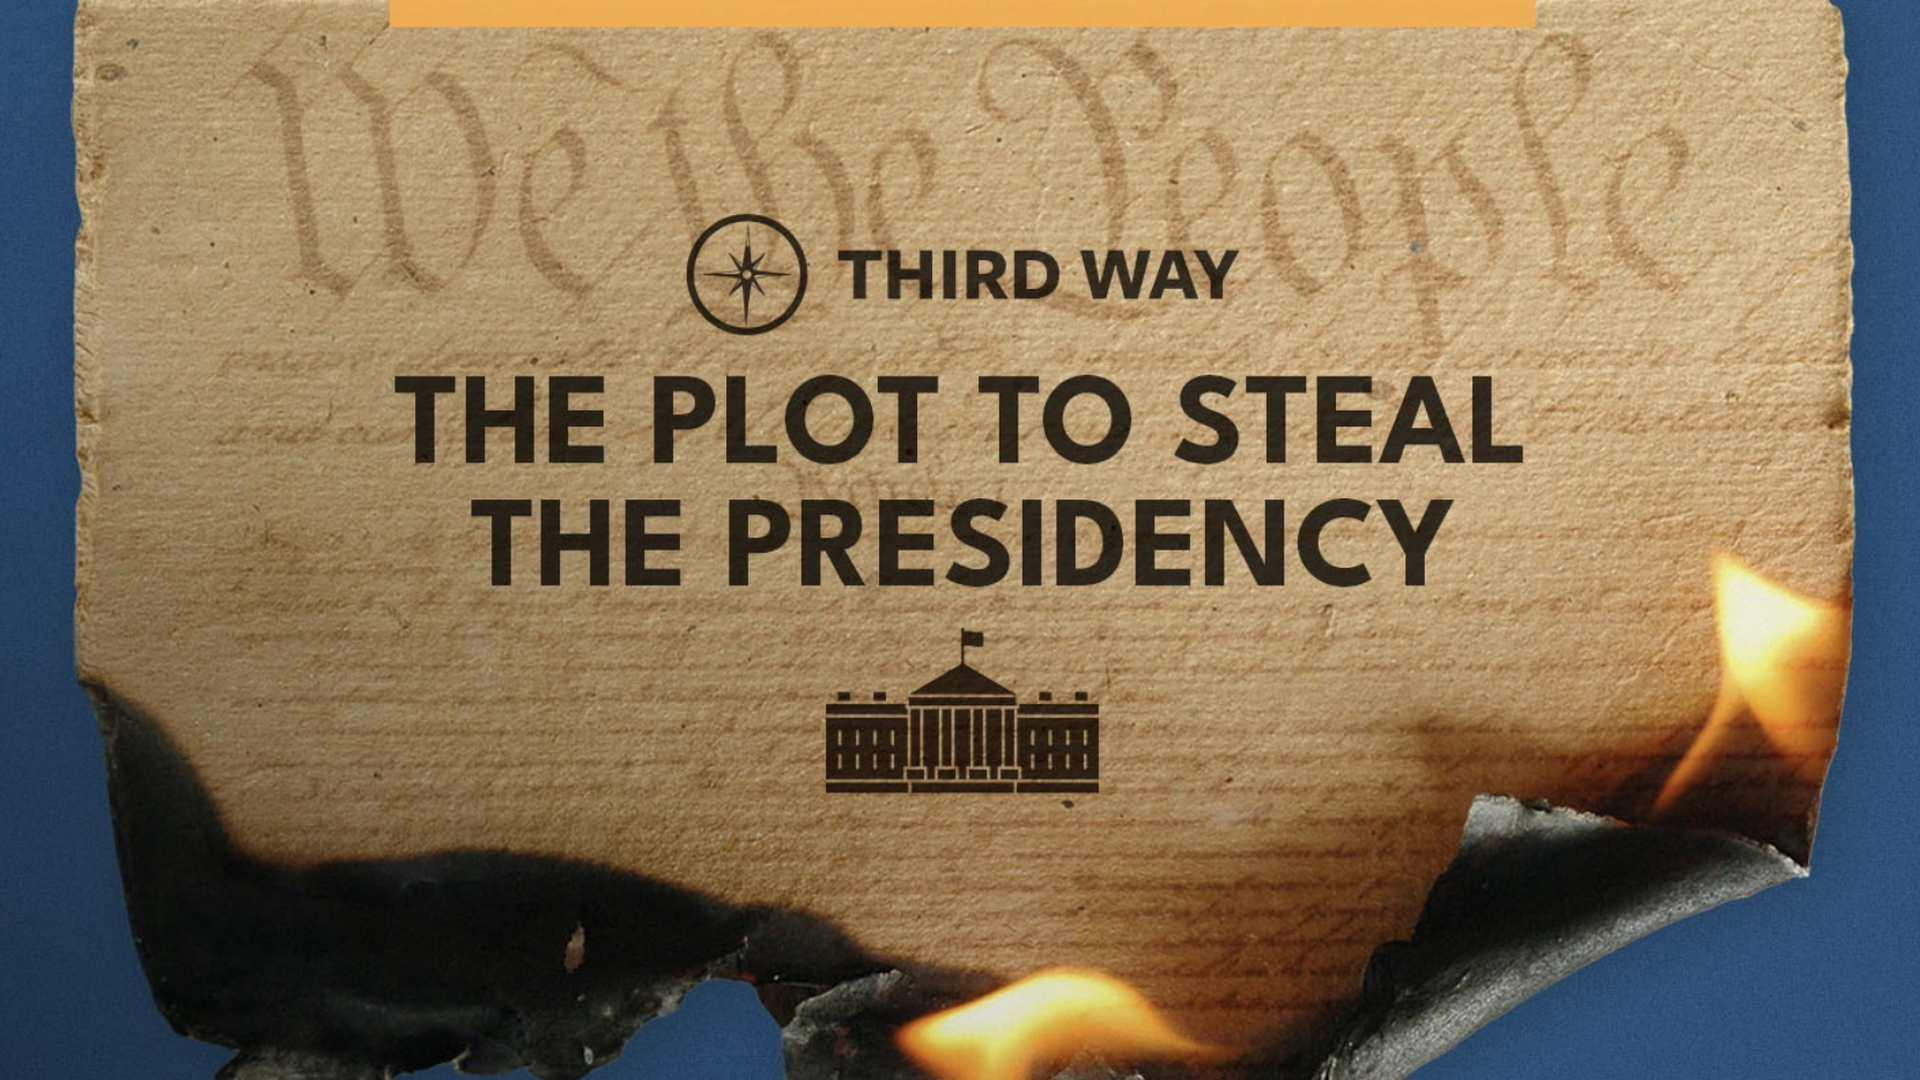 Third Way sign: The Plot to Steal the Presidency